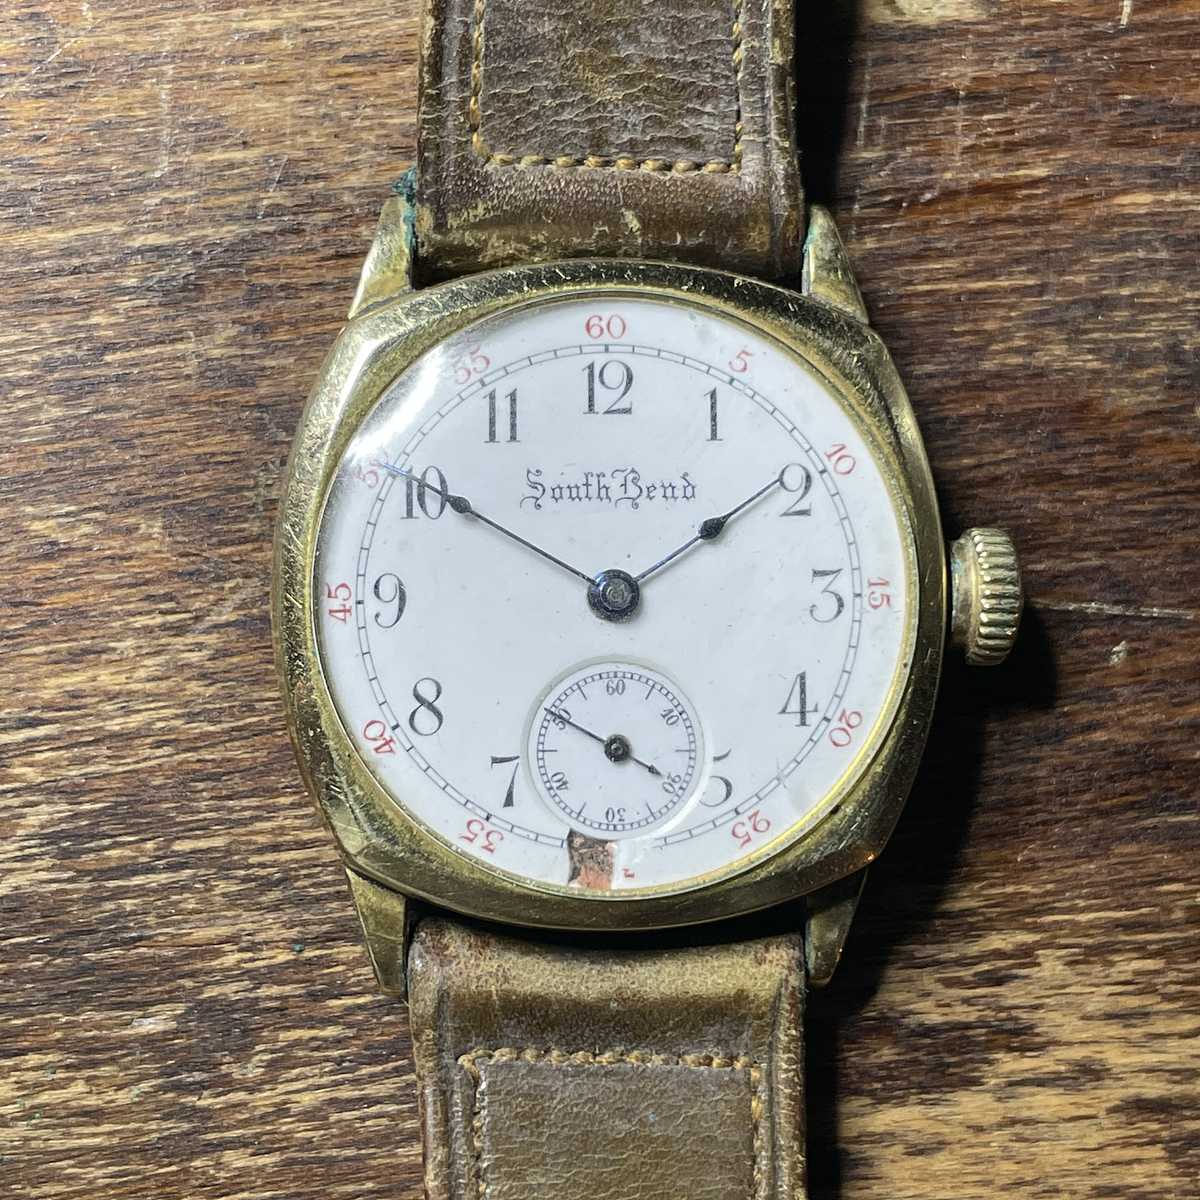 1911 South Bend Watch Grade 100 Front View